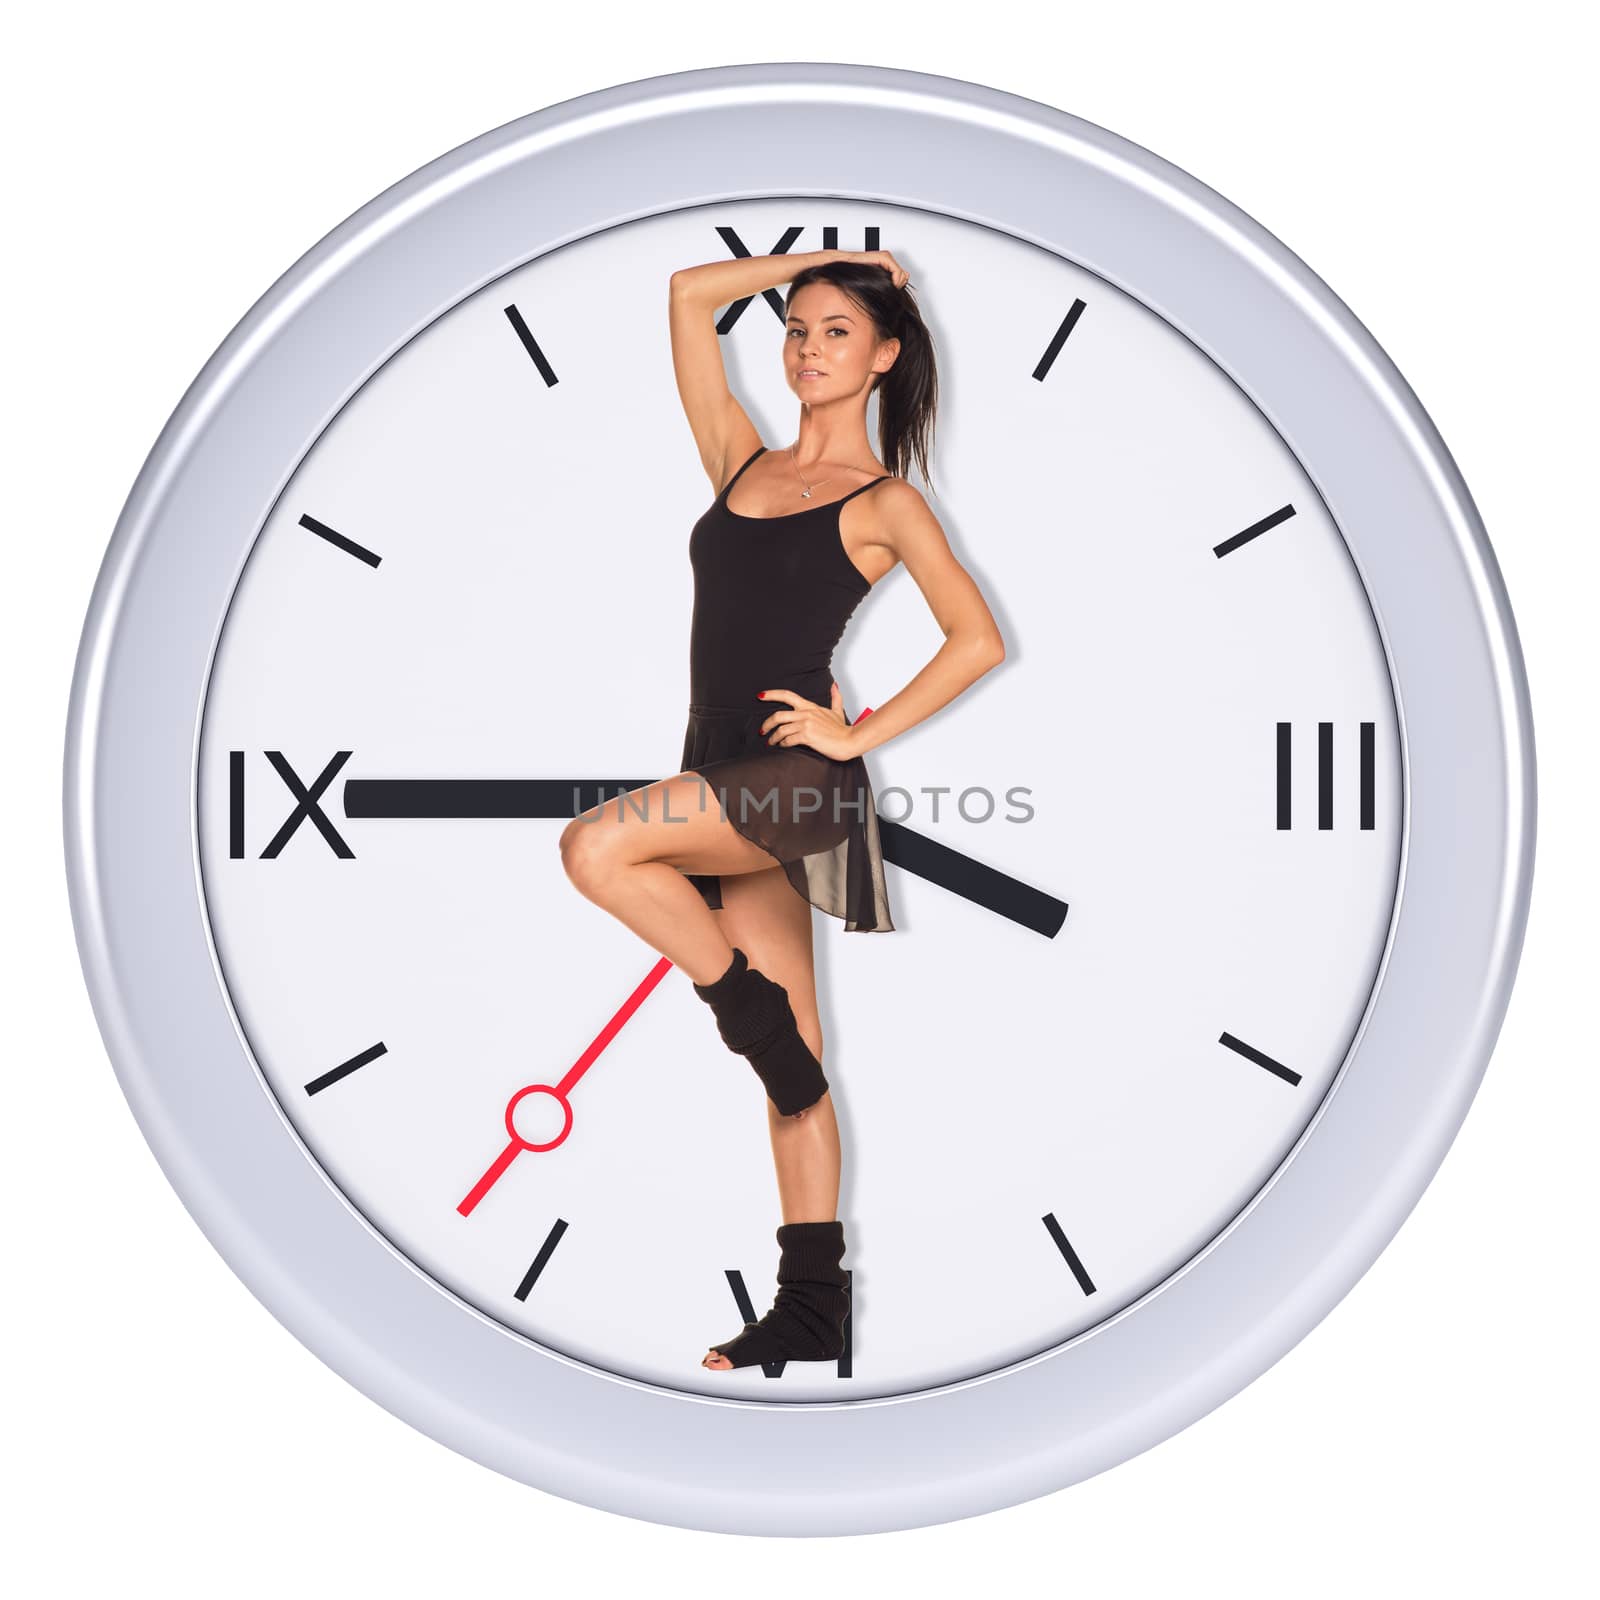 Young woman standing on one foot in center of clock on isolated white background